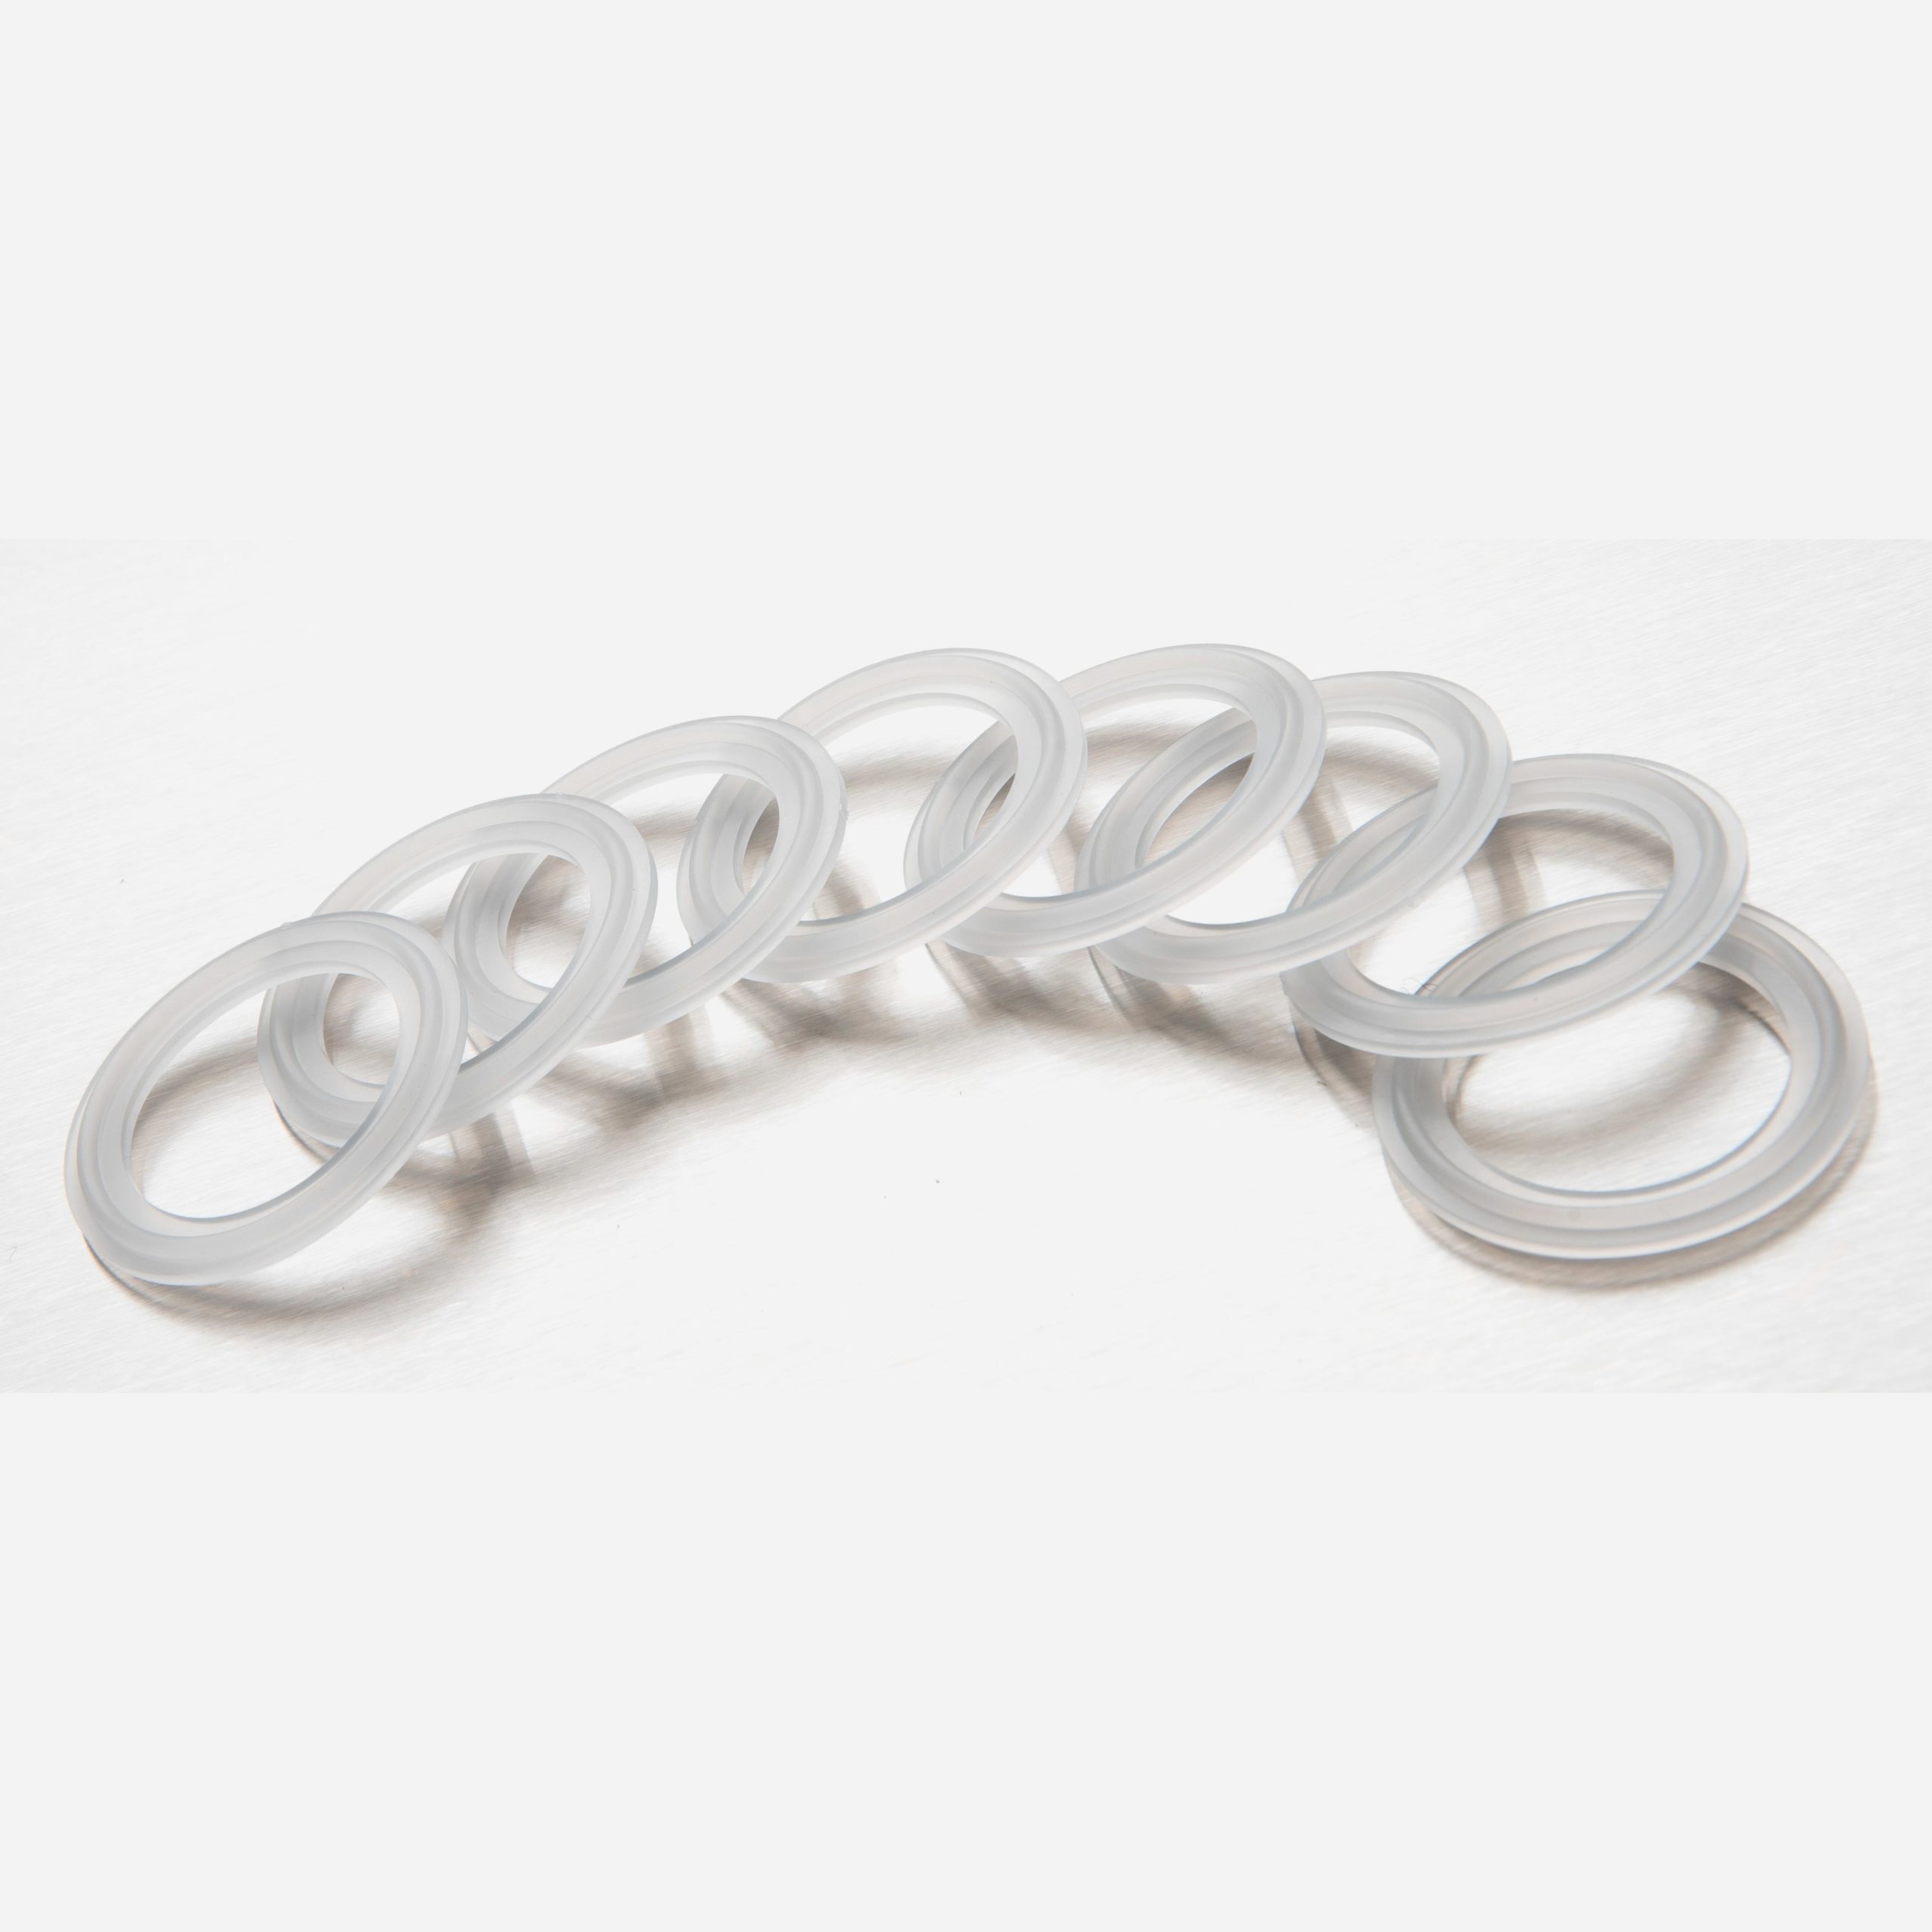 Platinum Cured Silicone Gaskets